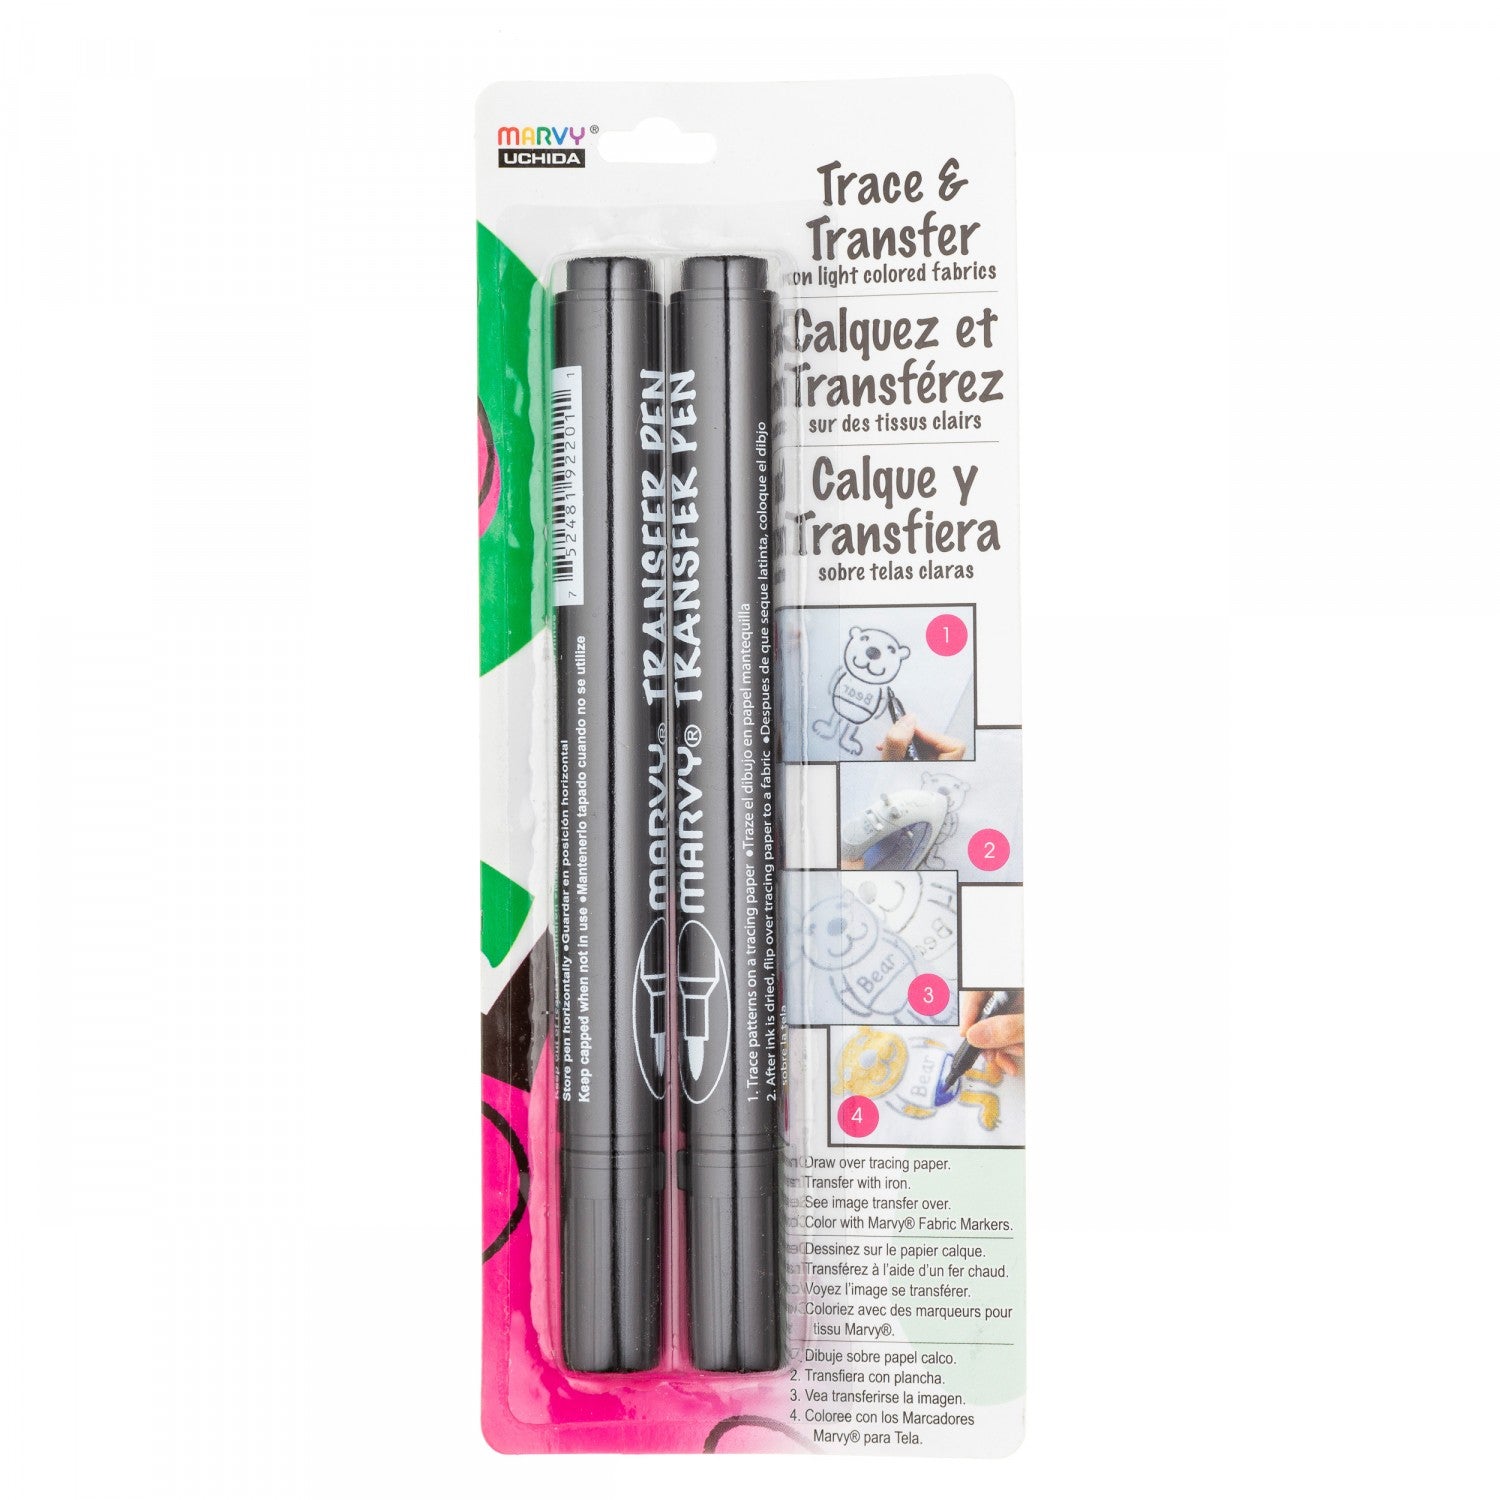 Trace & Transfer Fabric Marker 2 Pack